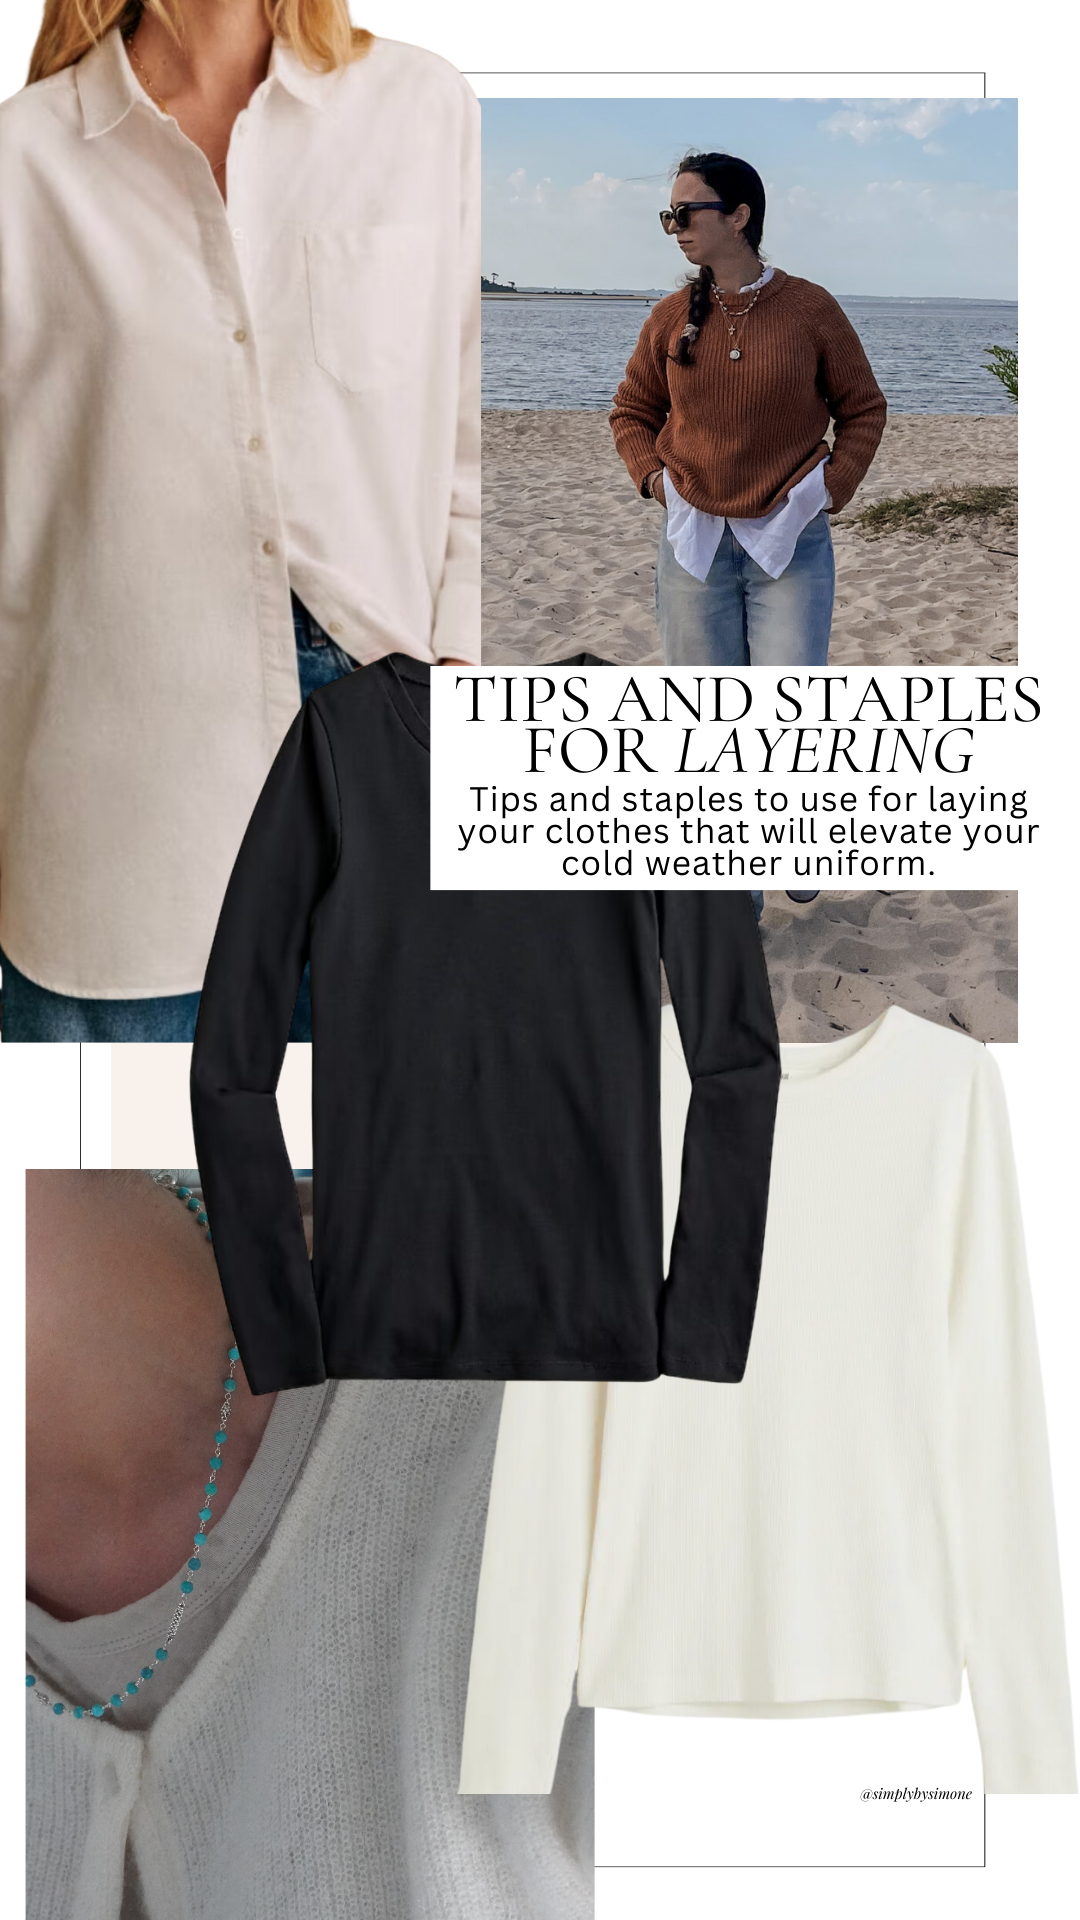 Tips for Layering Collage with Staples and Outfit Inspiration